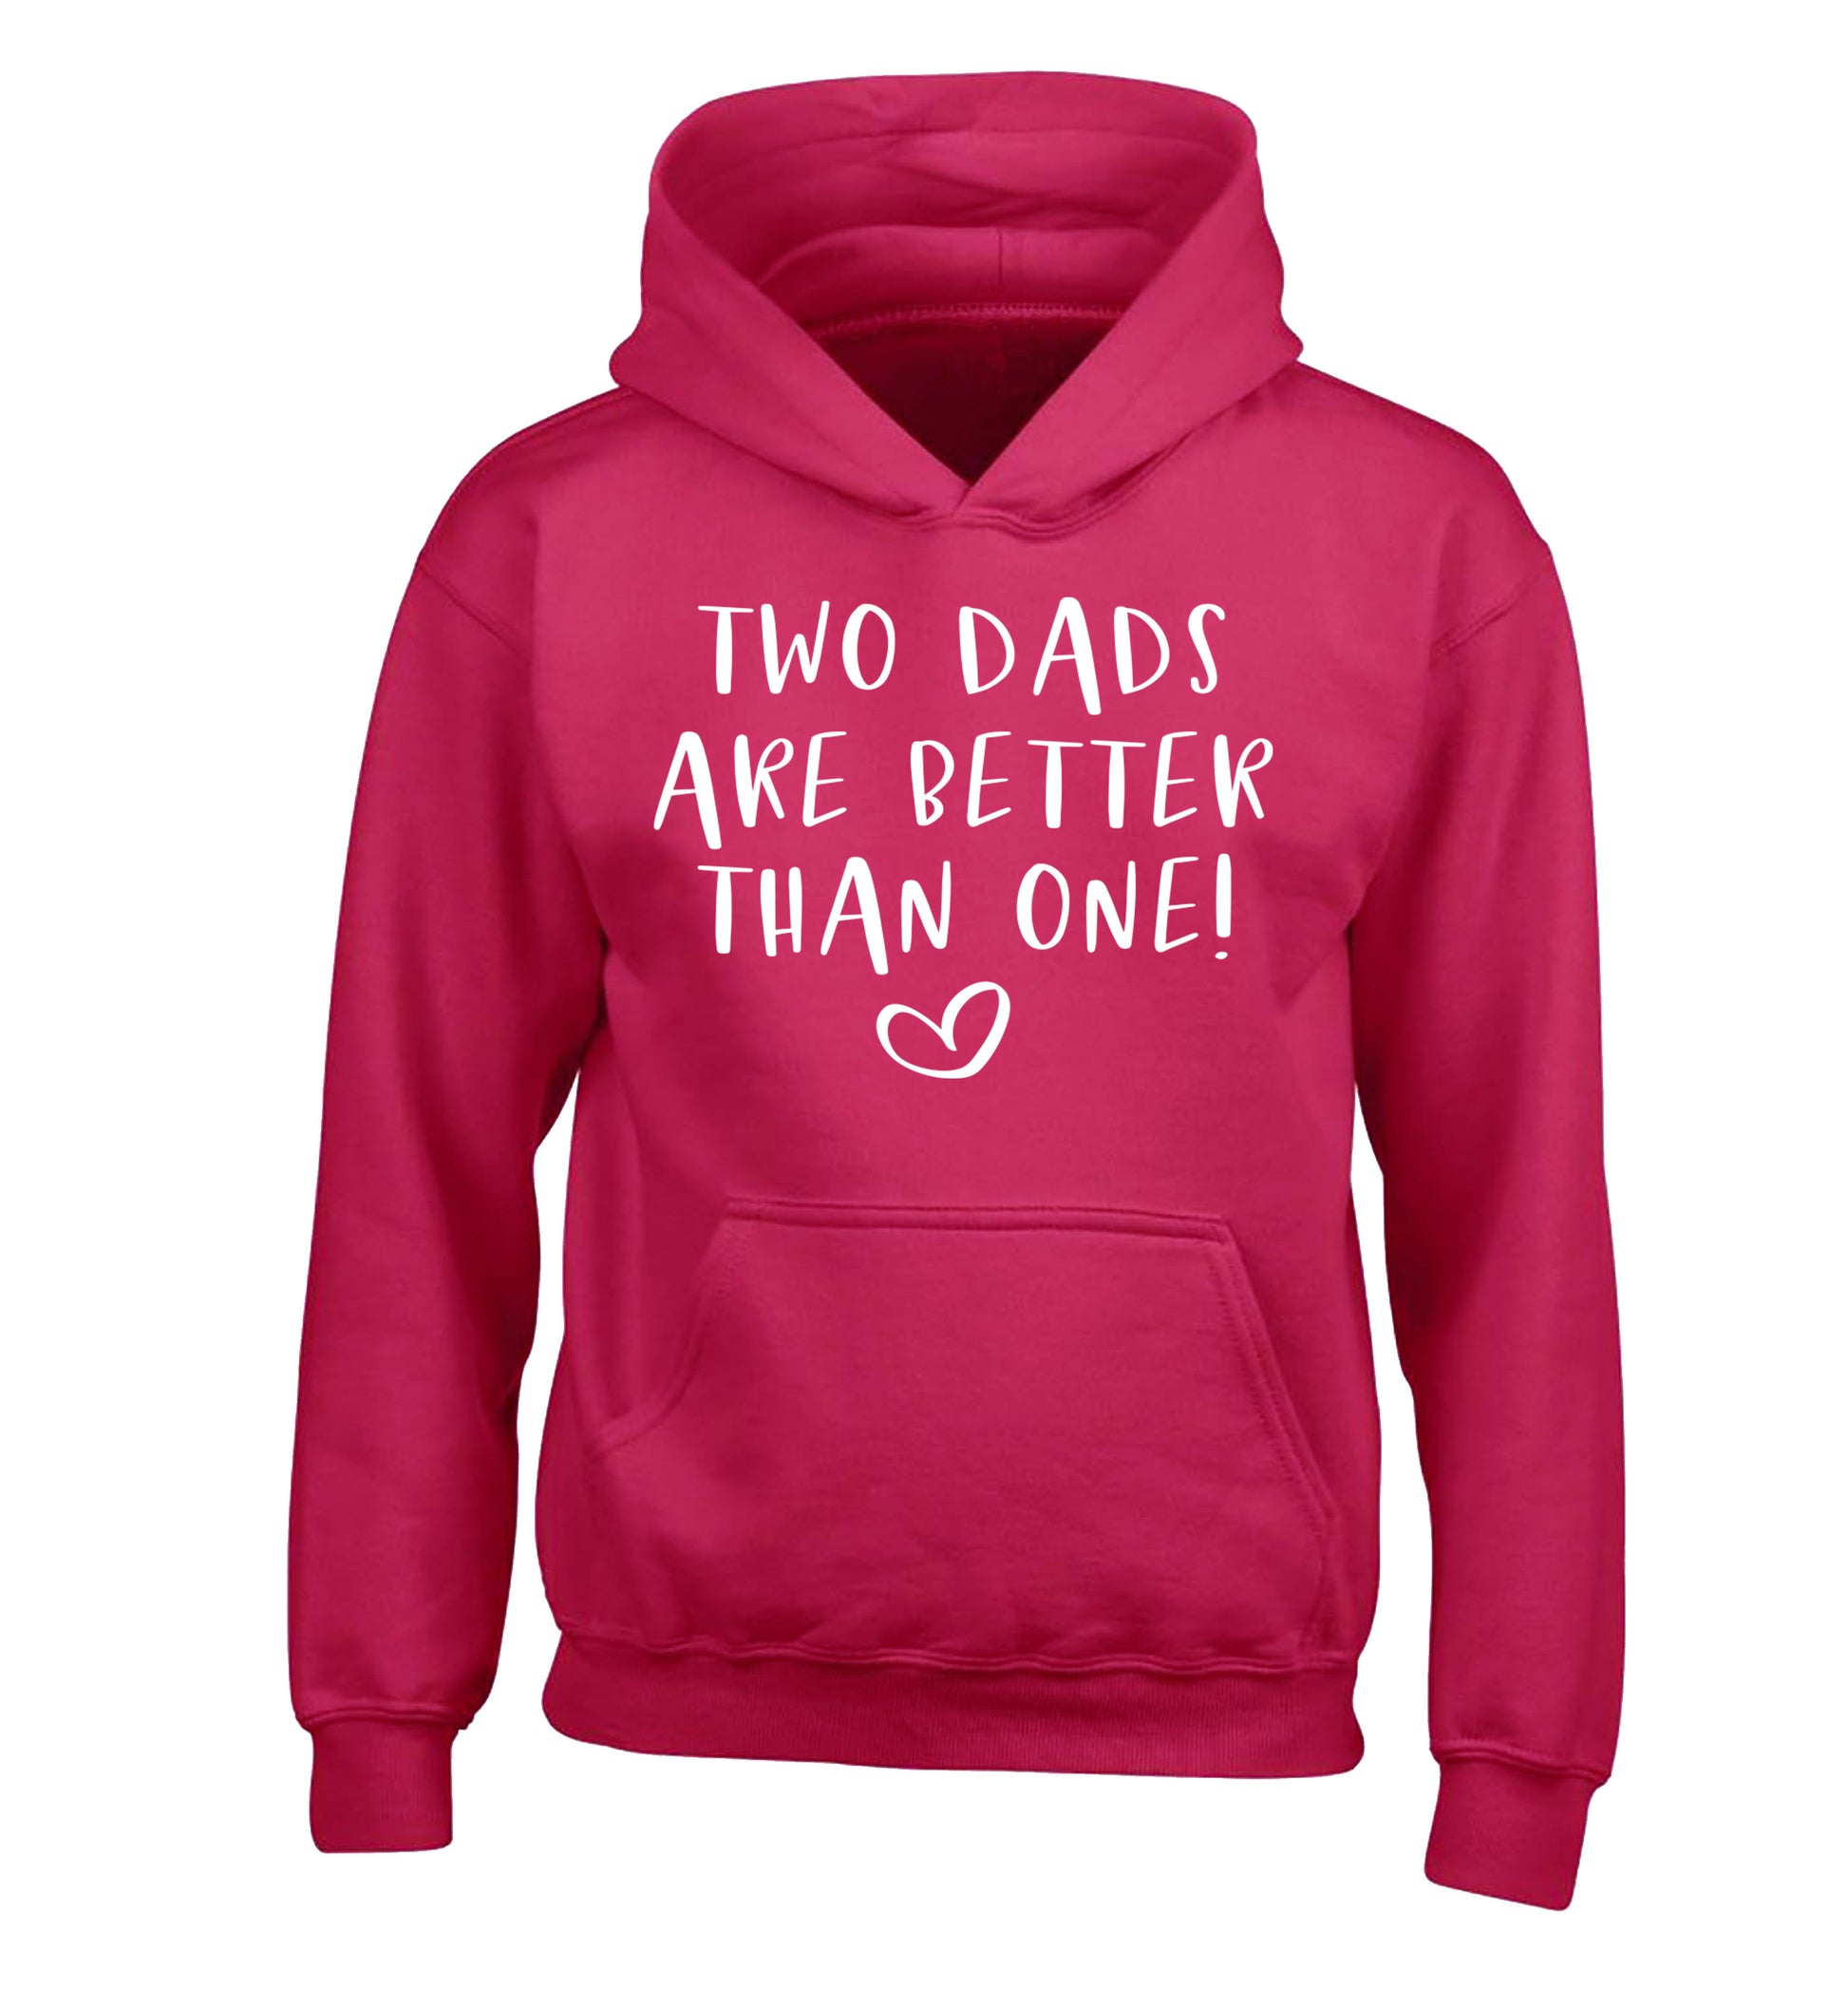 Two dads are better than one children's pink hoodie 12-13 Years